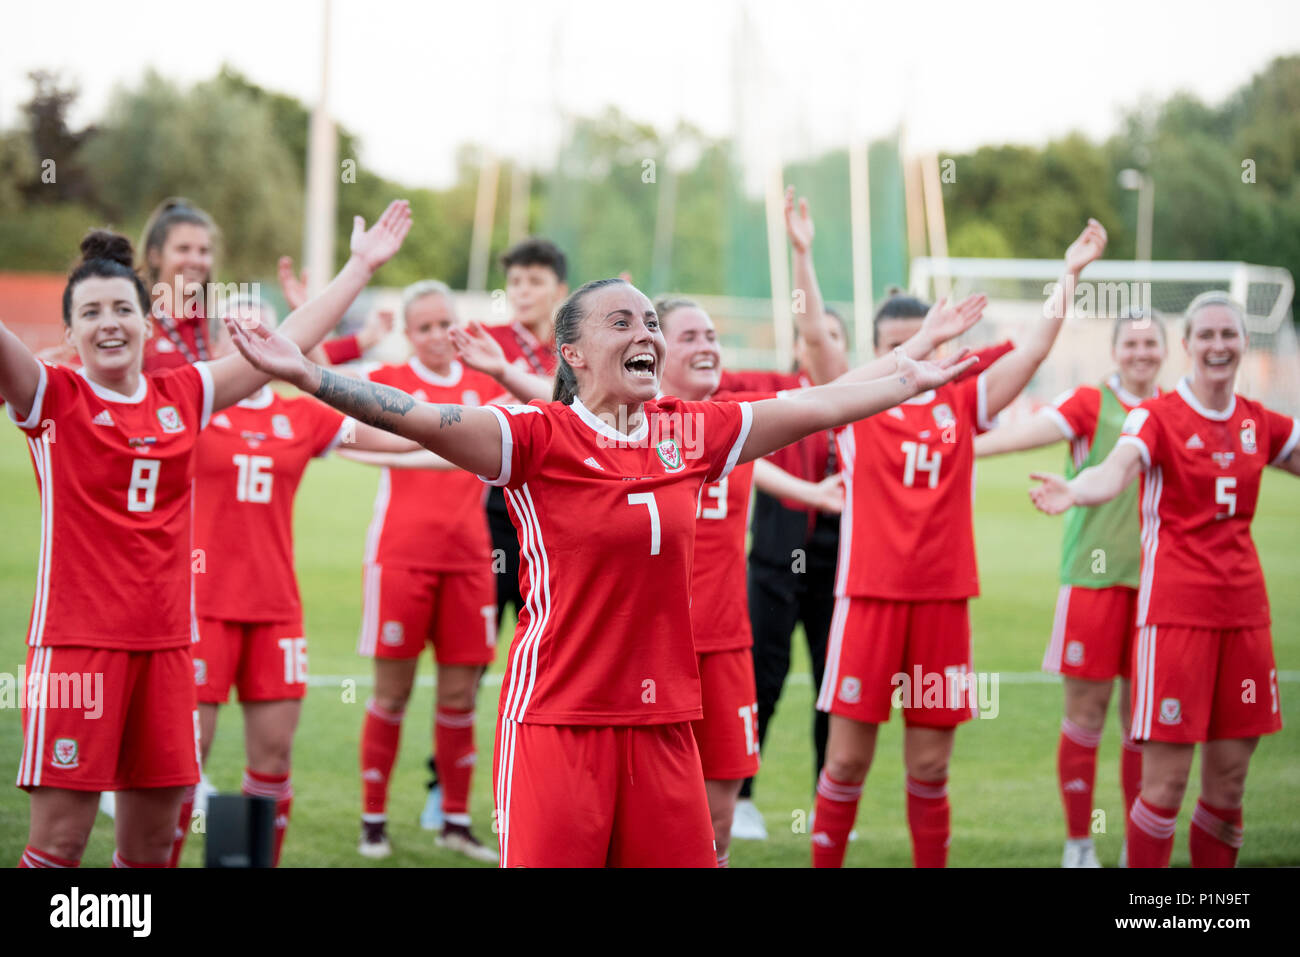 Newport, Wales. 12th June 2018. Wales v Russia, World Cup Qualifier 2019, Newport Stadium, Newport, Wales, 12/6/18: Wales players celebrate beating Russia 3-0 Credit: Andrew Dowling/Influential Photography/Alamy Live News Stock Photo